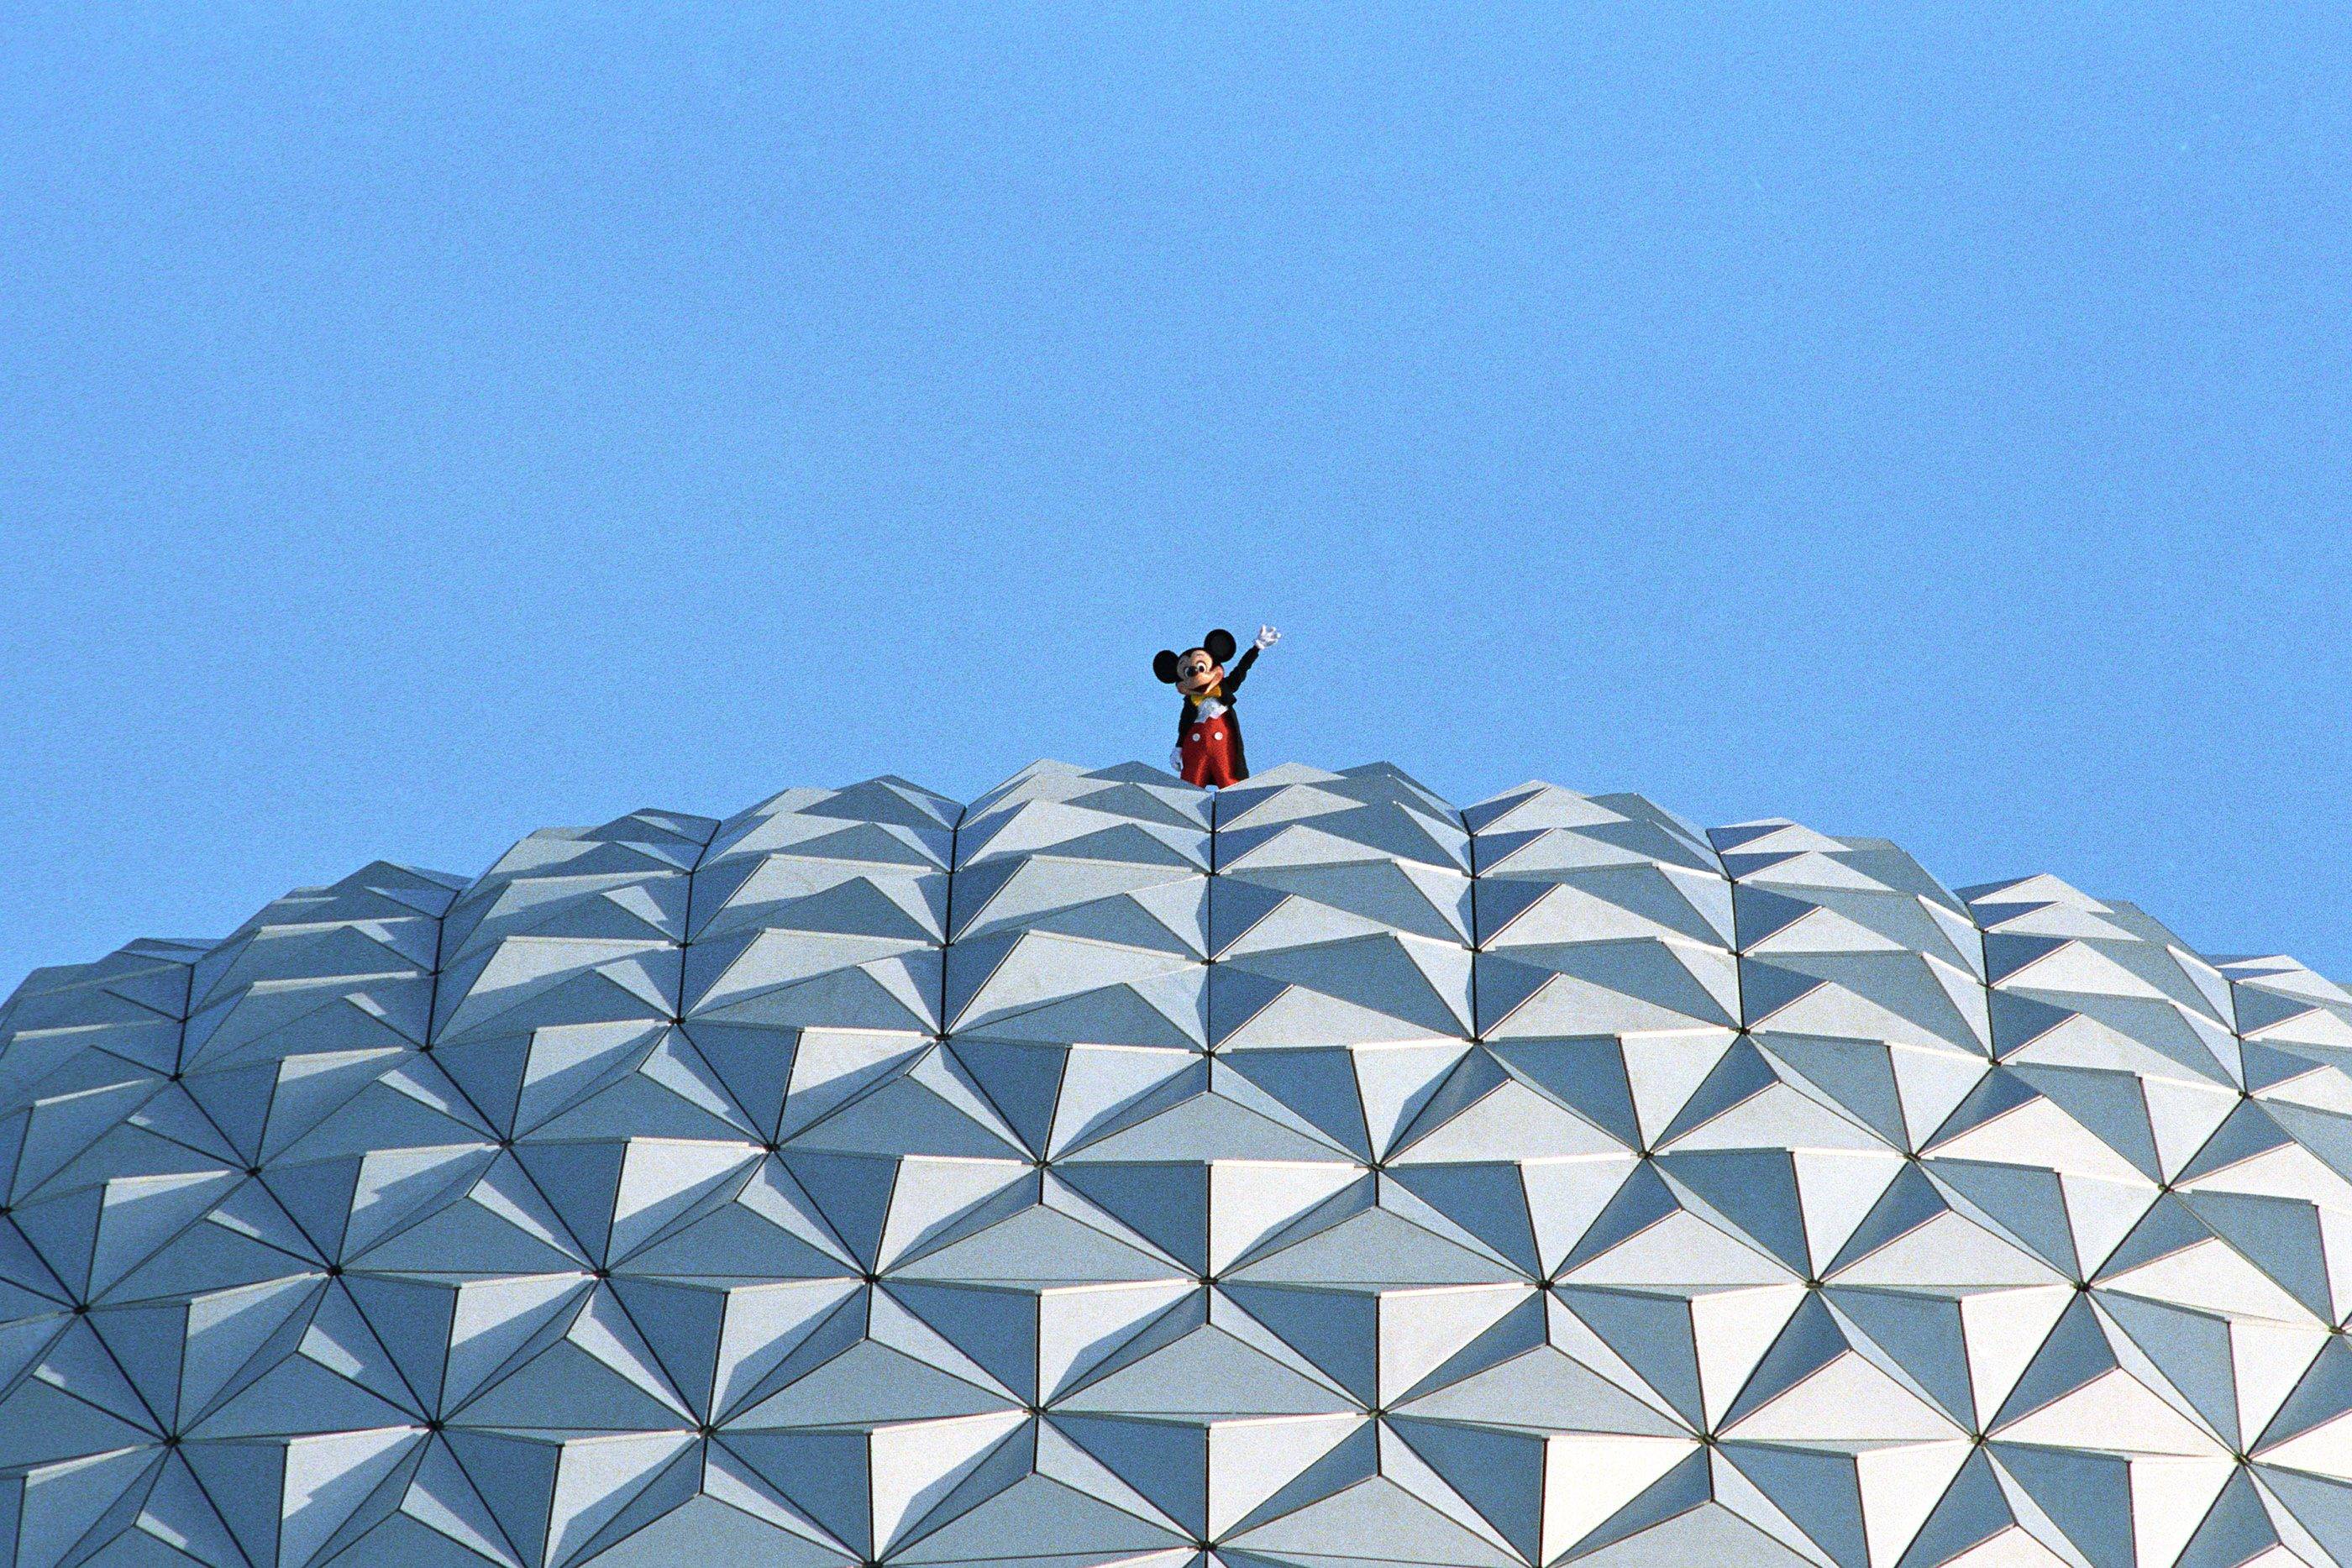 Mickey Mouse atop Spaceship Earth at EPCOT in 1993